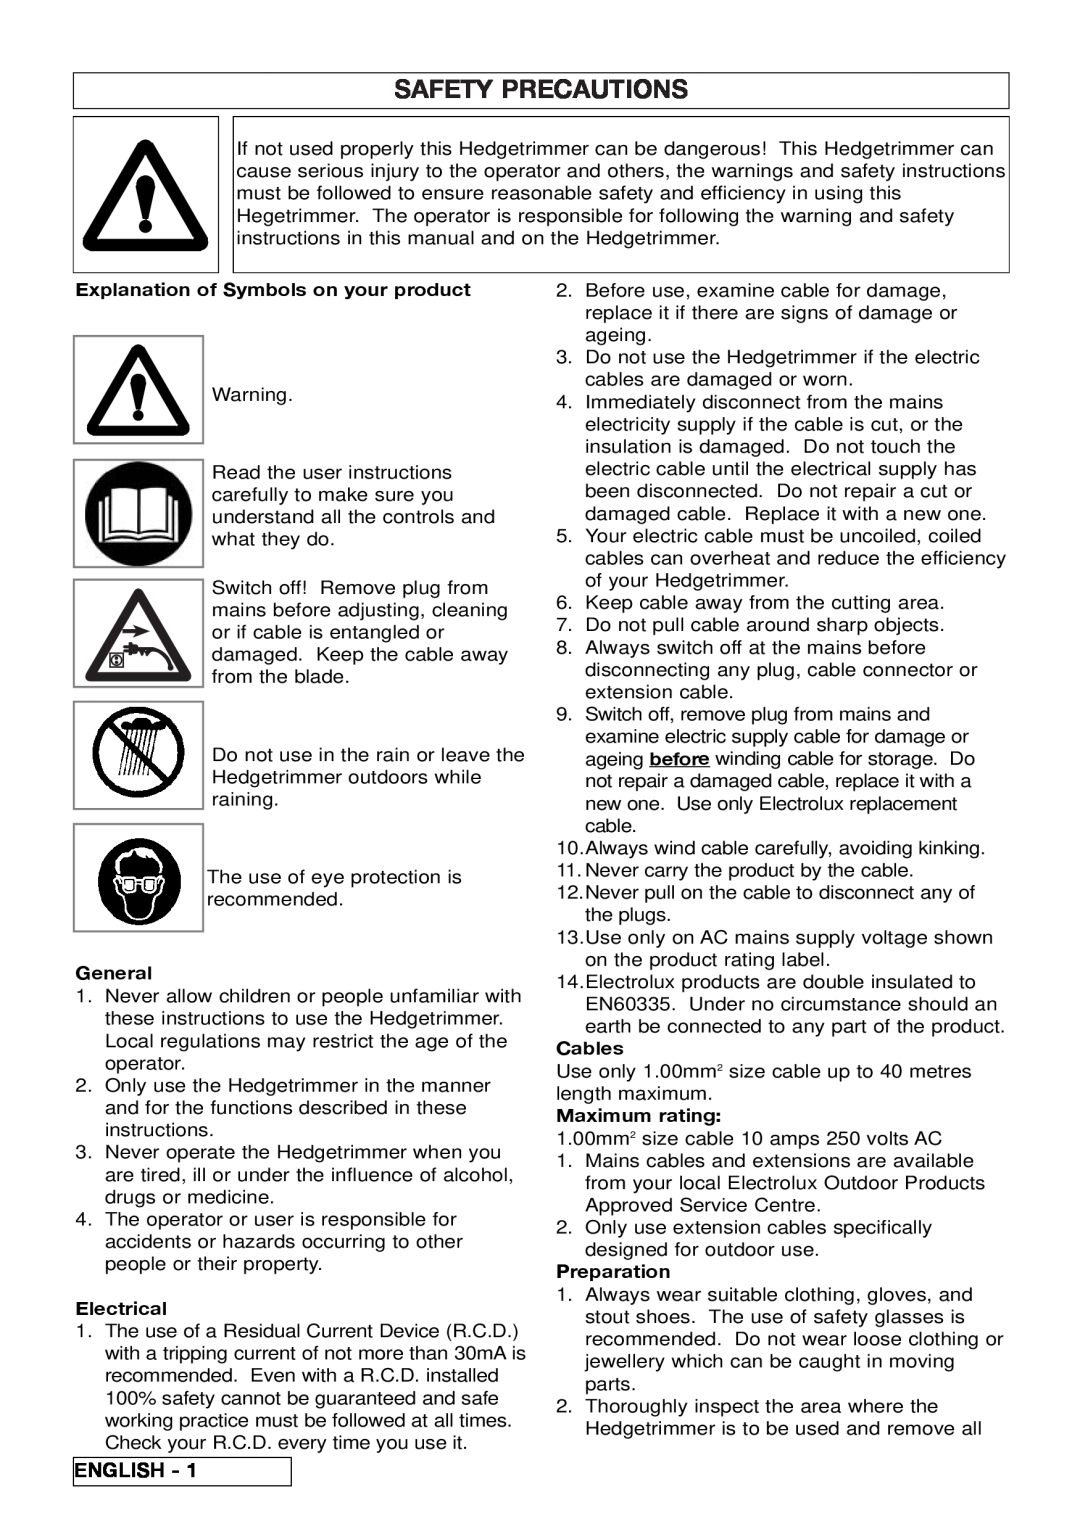 Electrolux 96481576200 Safety Precautions, English, Explanation of Symbols on your product, General, Electrical, Cables 